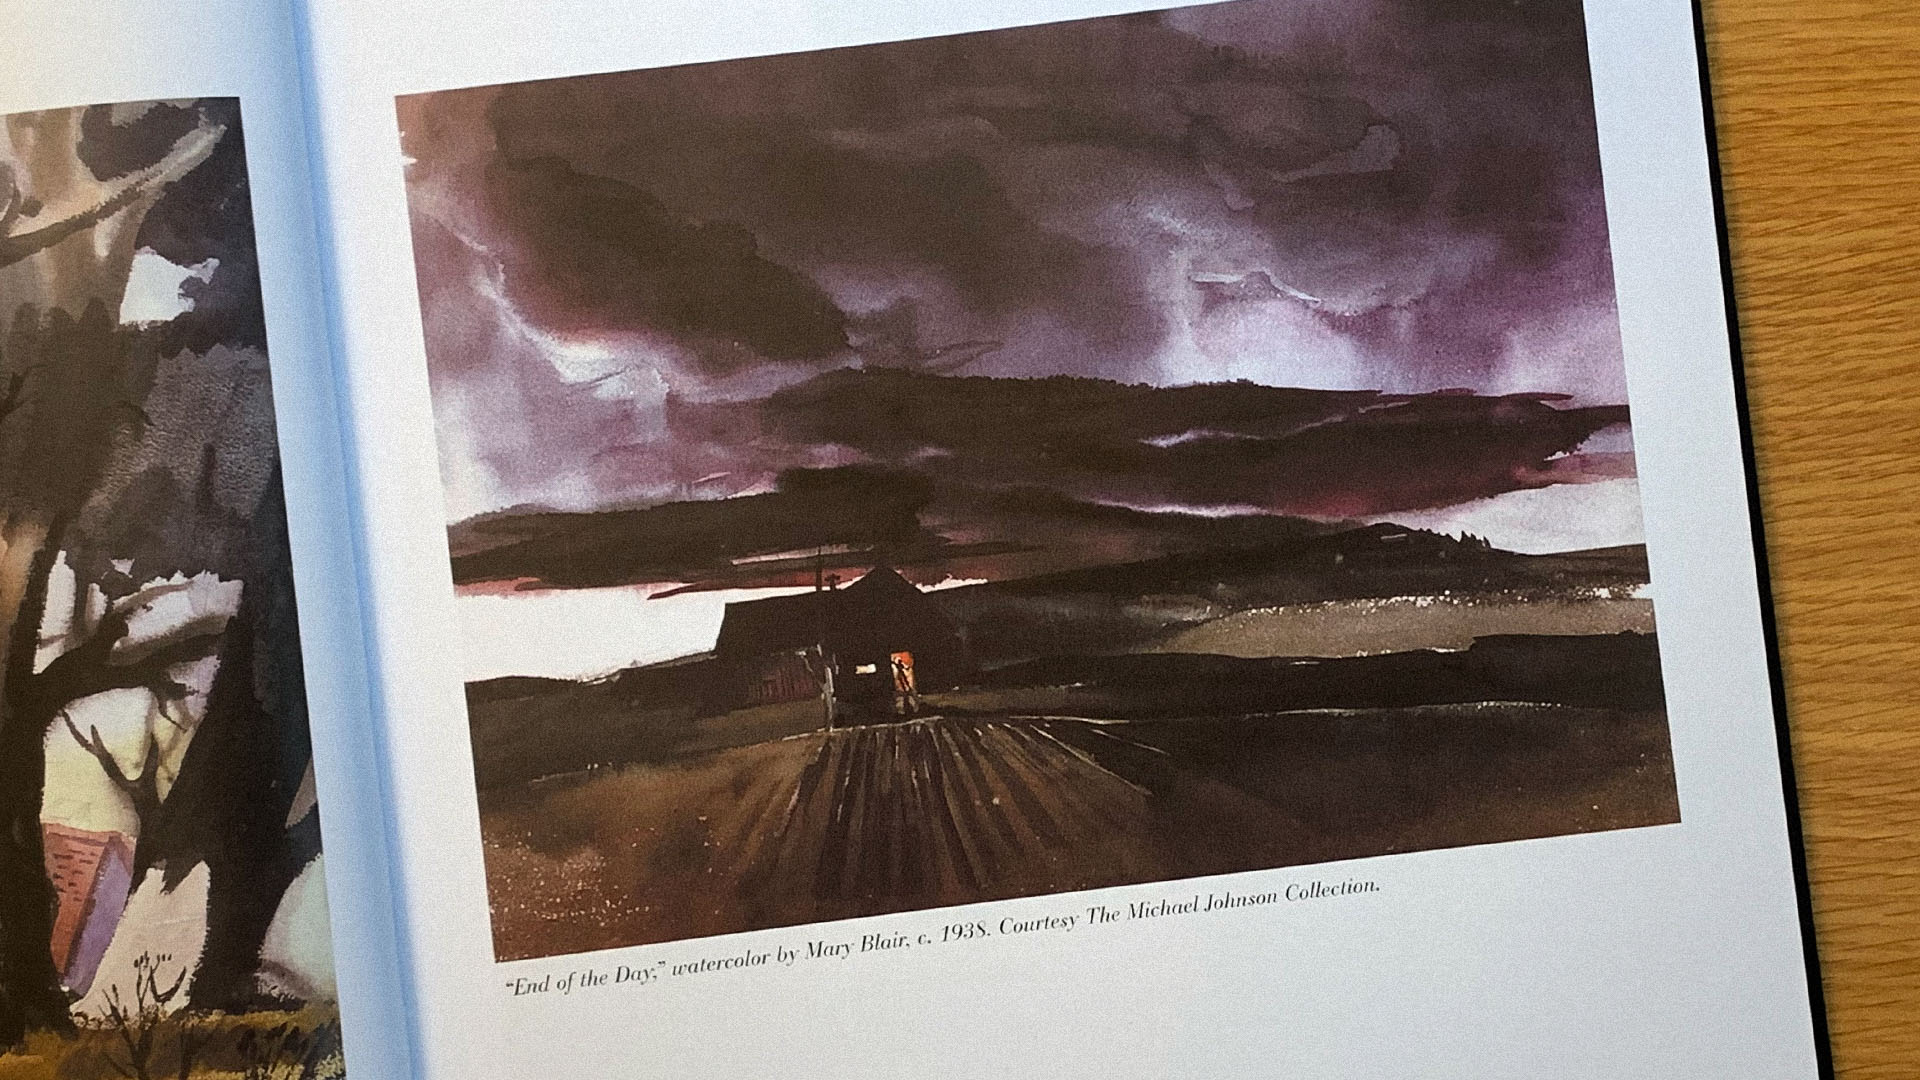 This early watercolor painting of Mary Blair titled ‘End Of The Day’ shows a dark and moody landscape. The image is taken from 'The Art And Flair Of Mary Blair' by John Canemaker.